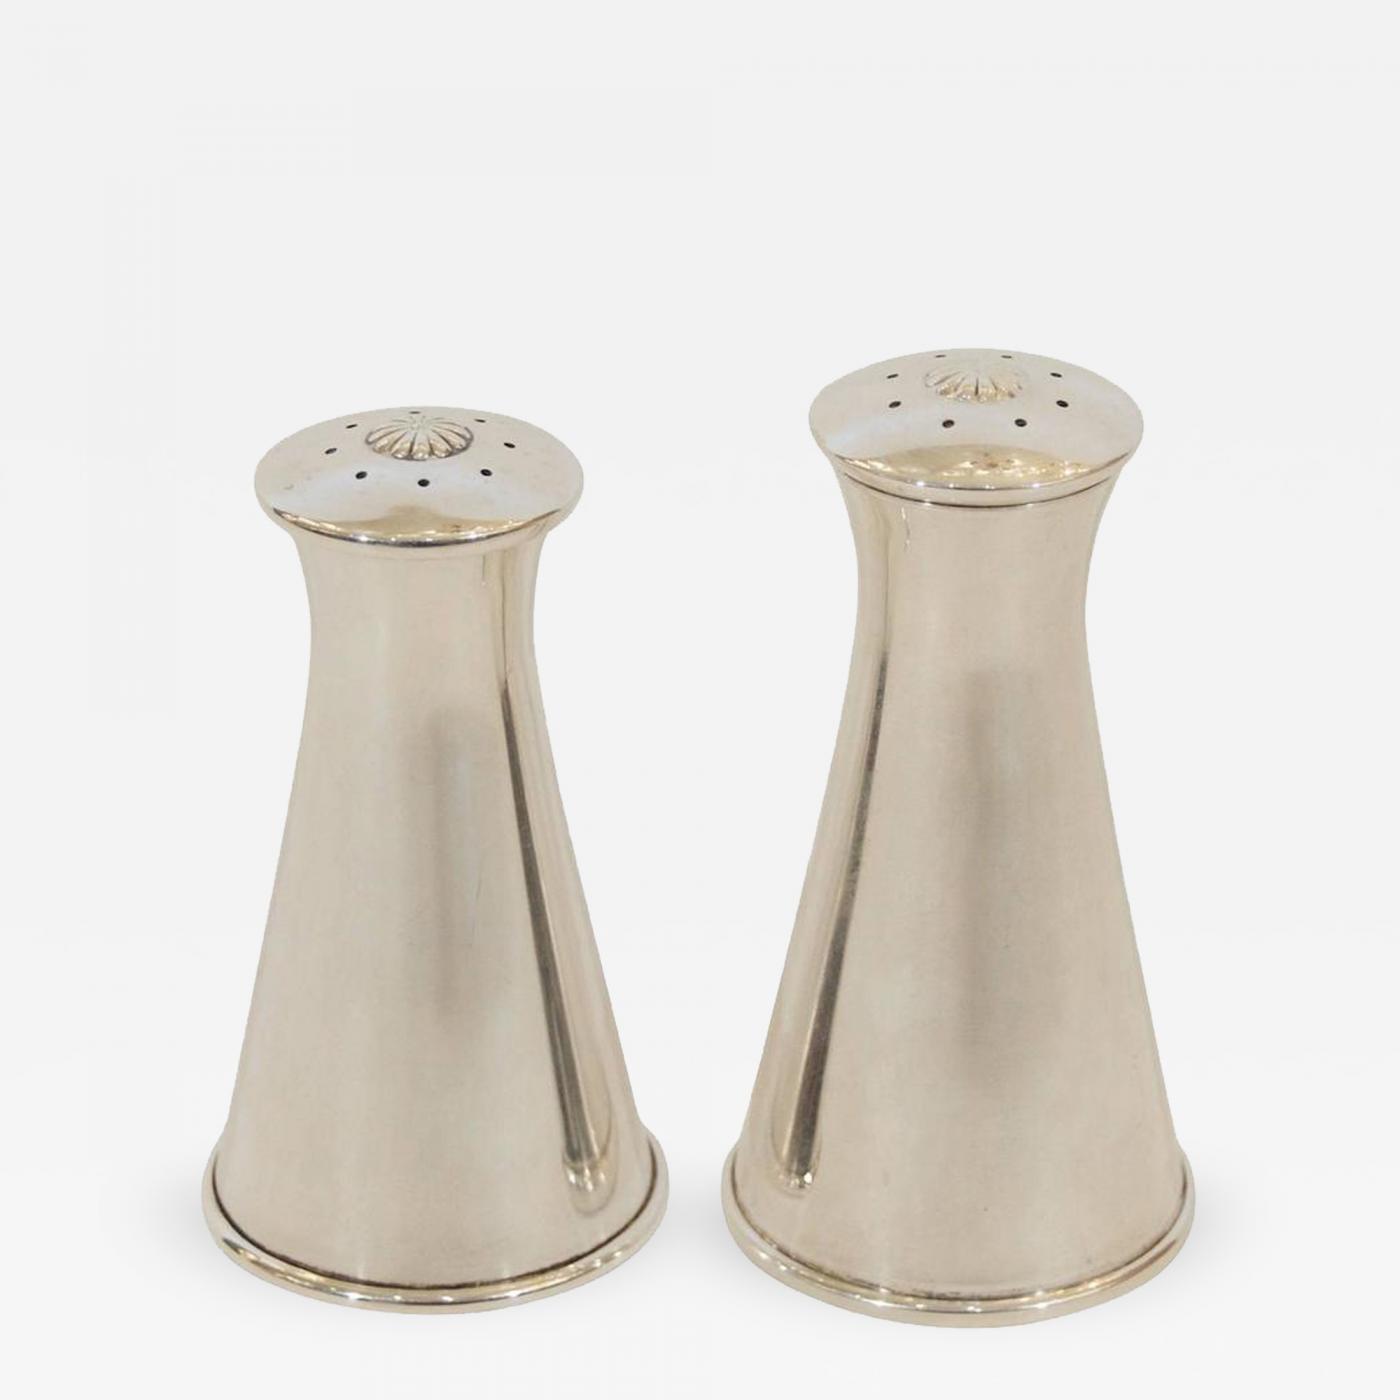 https://cdn.incollect.com/sites/default/files/zoom/-Reed-Barton-Modernist-Pair-of-Reed-Barton-Sterling-Silver-Salt-and-Pepper-Shakers-169391-239988.jpg